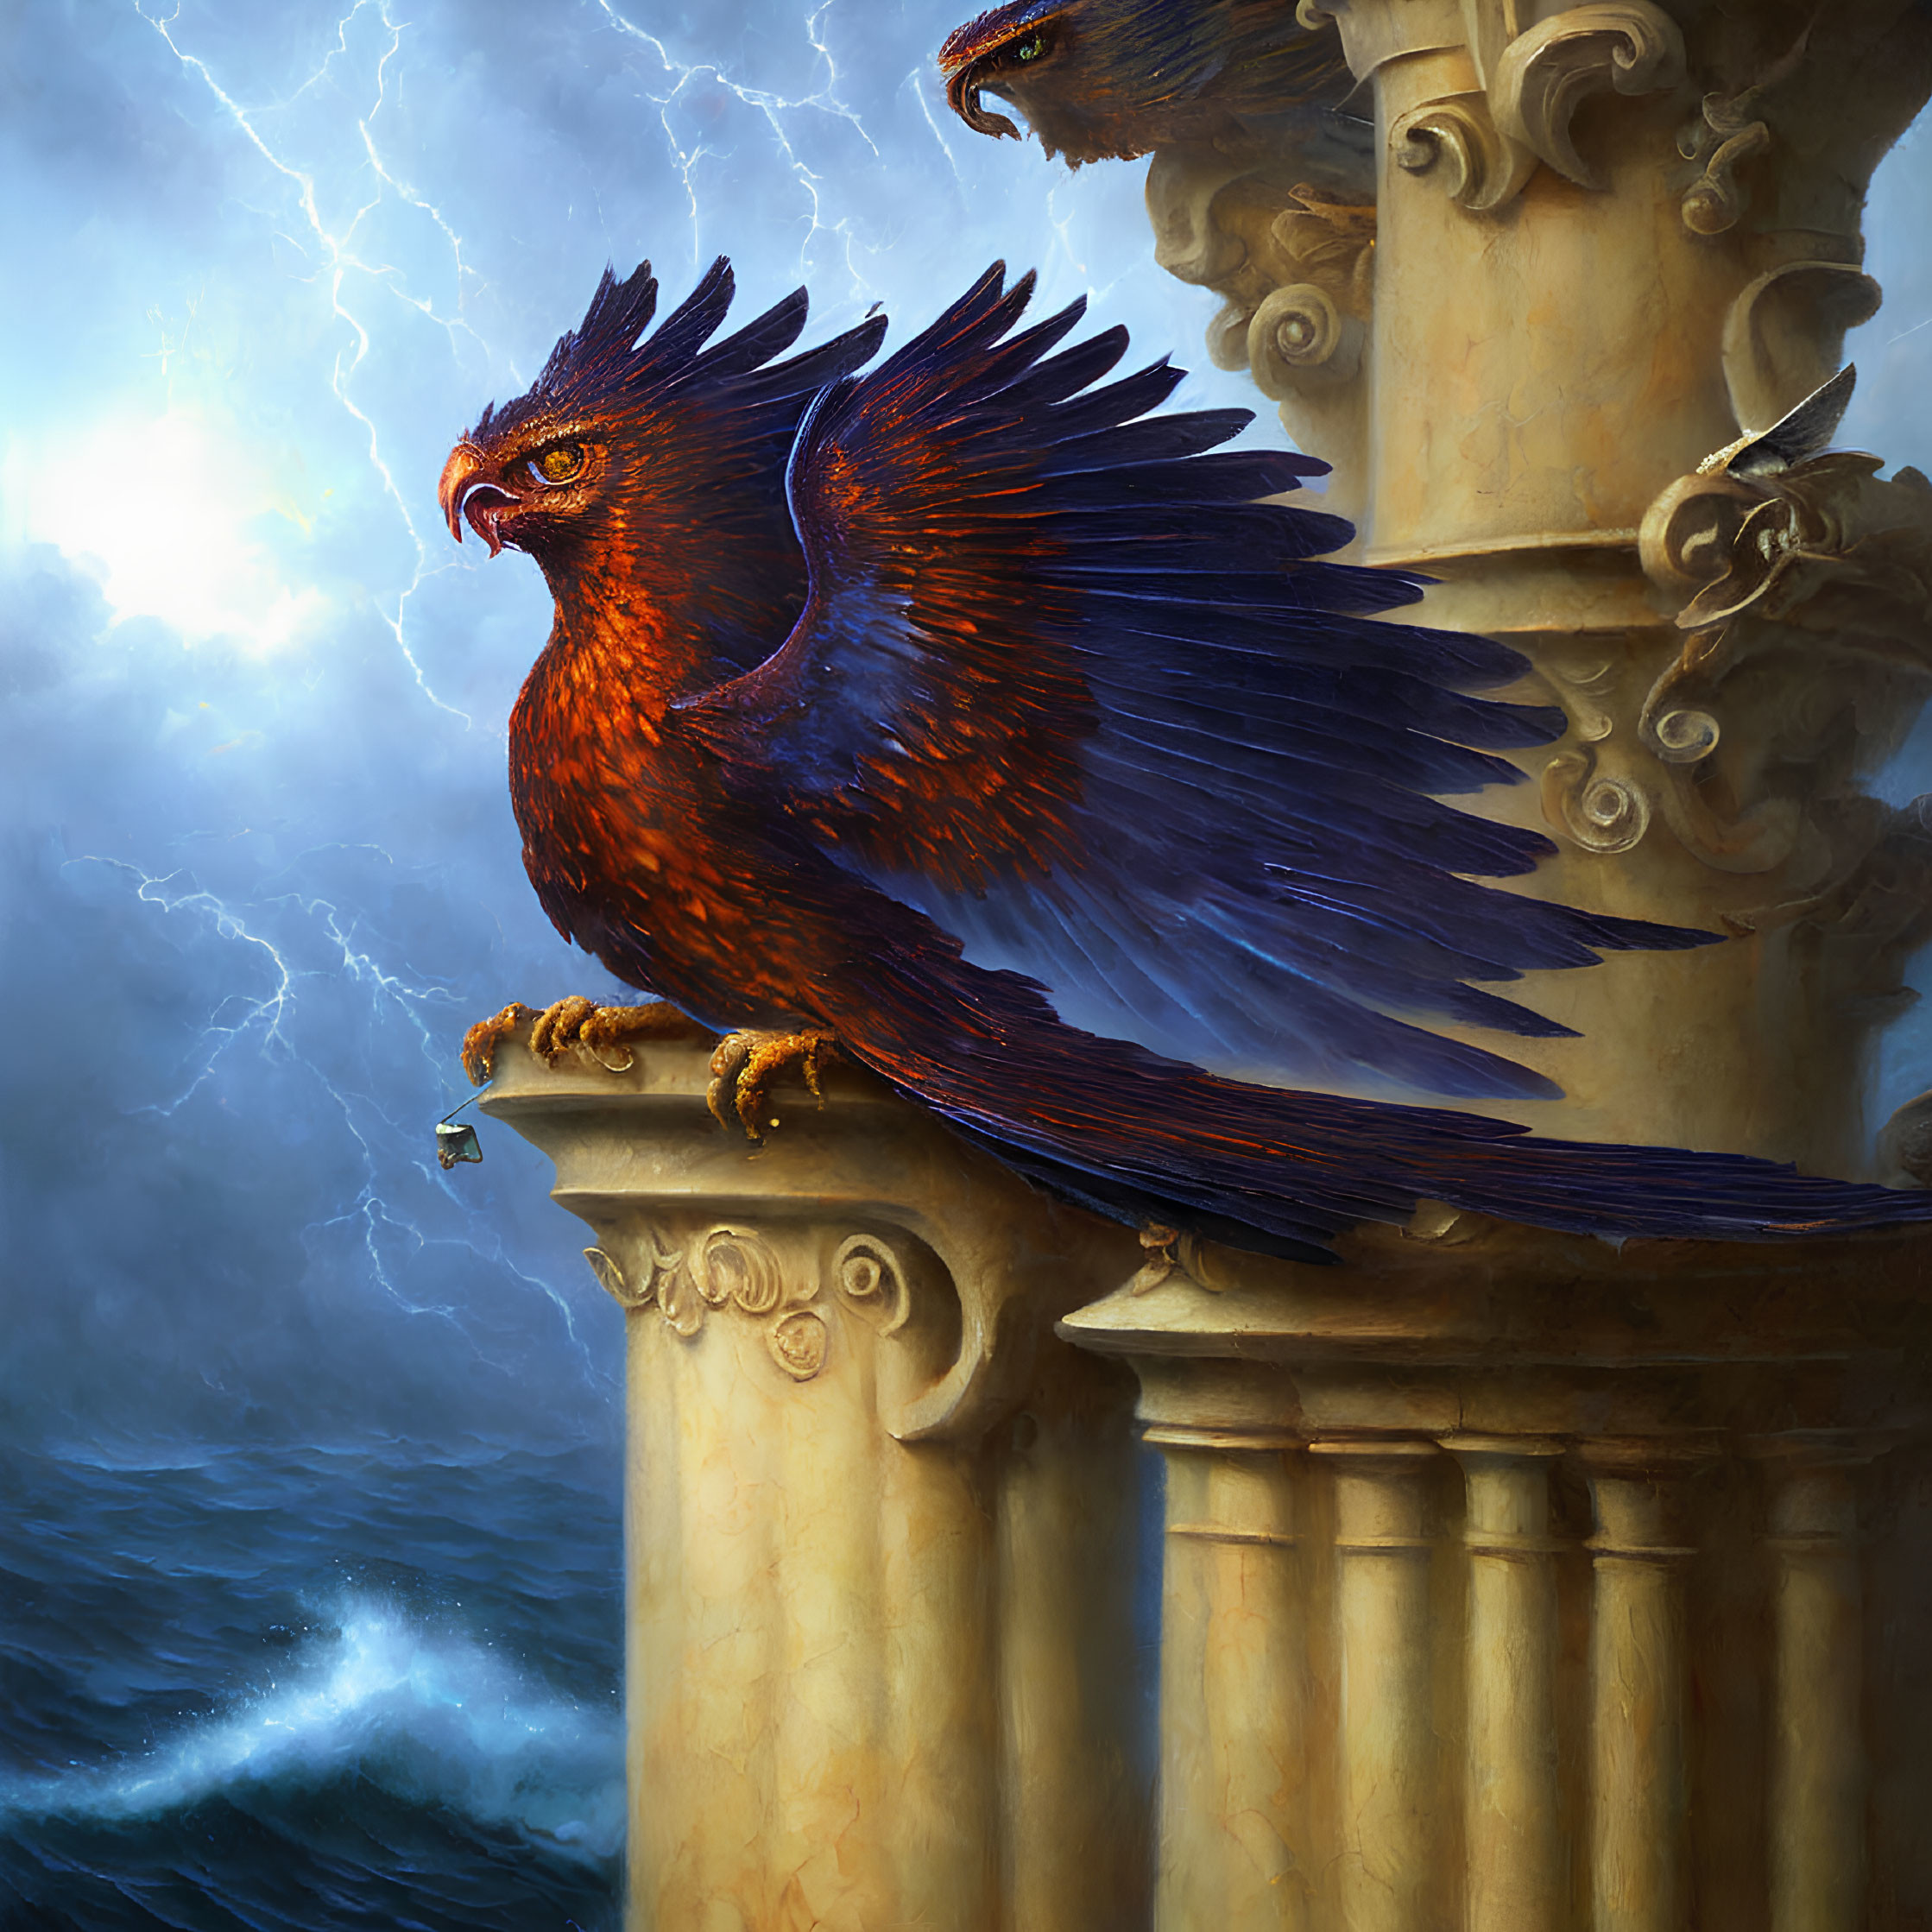 Mythical eagle with orange and blue plumage on ornate column in stormy sea